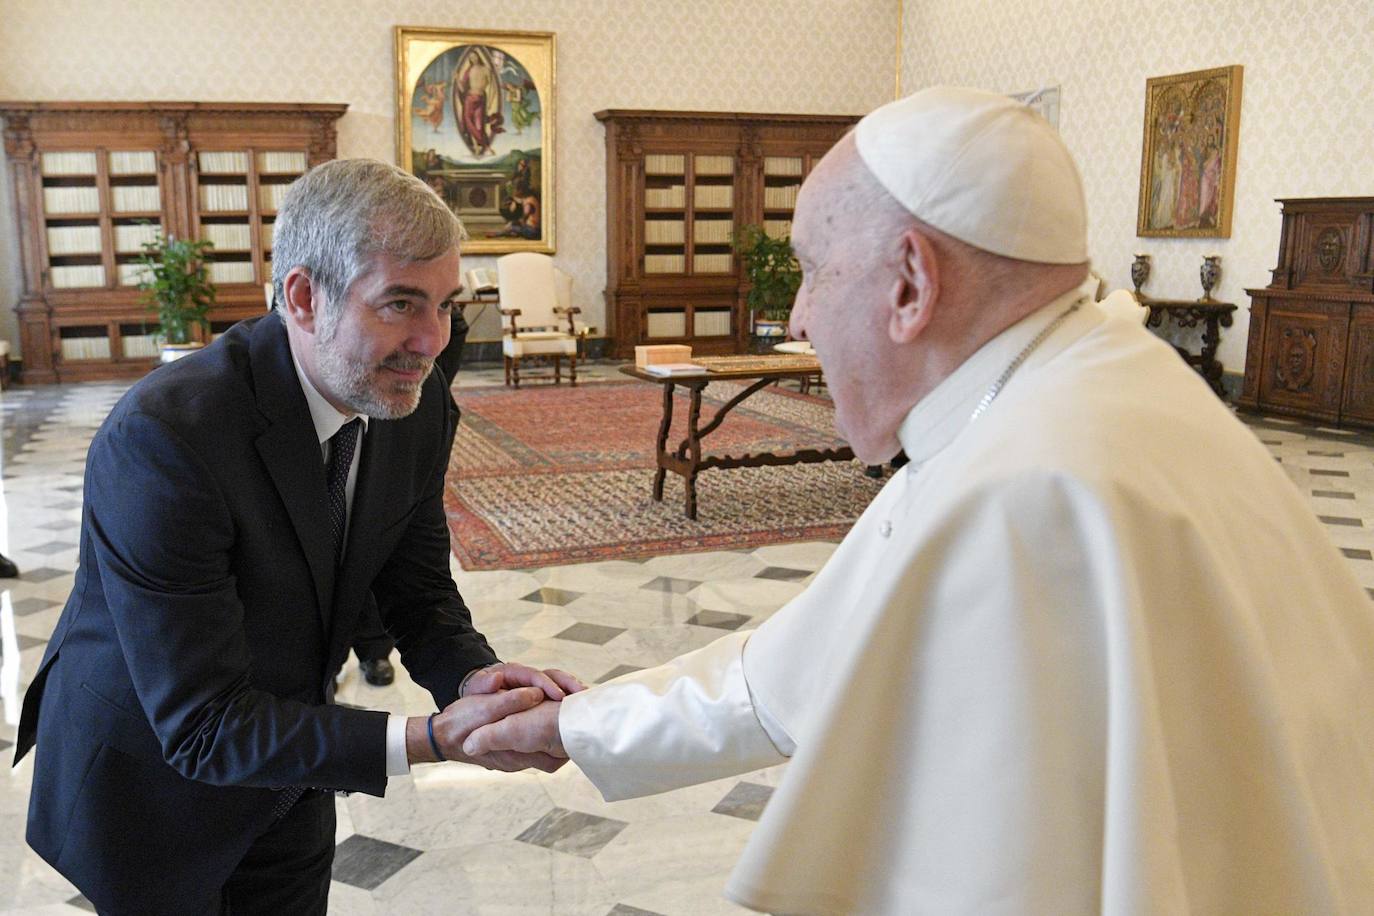 Clavijo: "Pope Francis thanks the Canarian people for welcoming migrants"